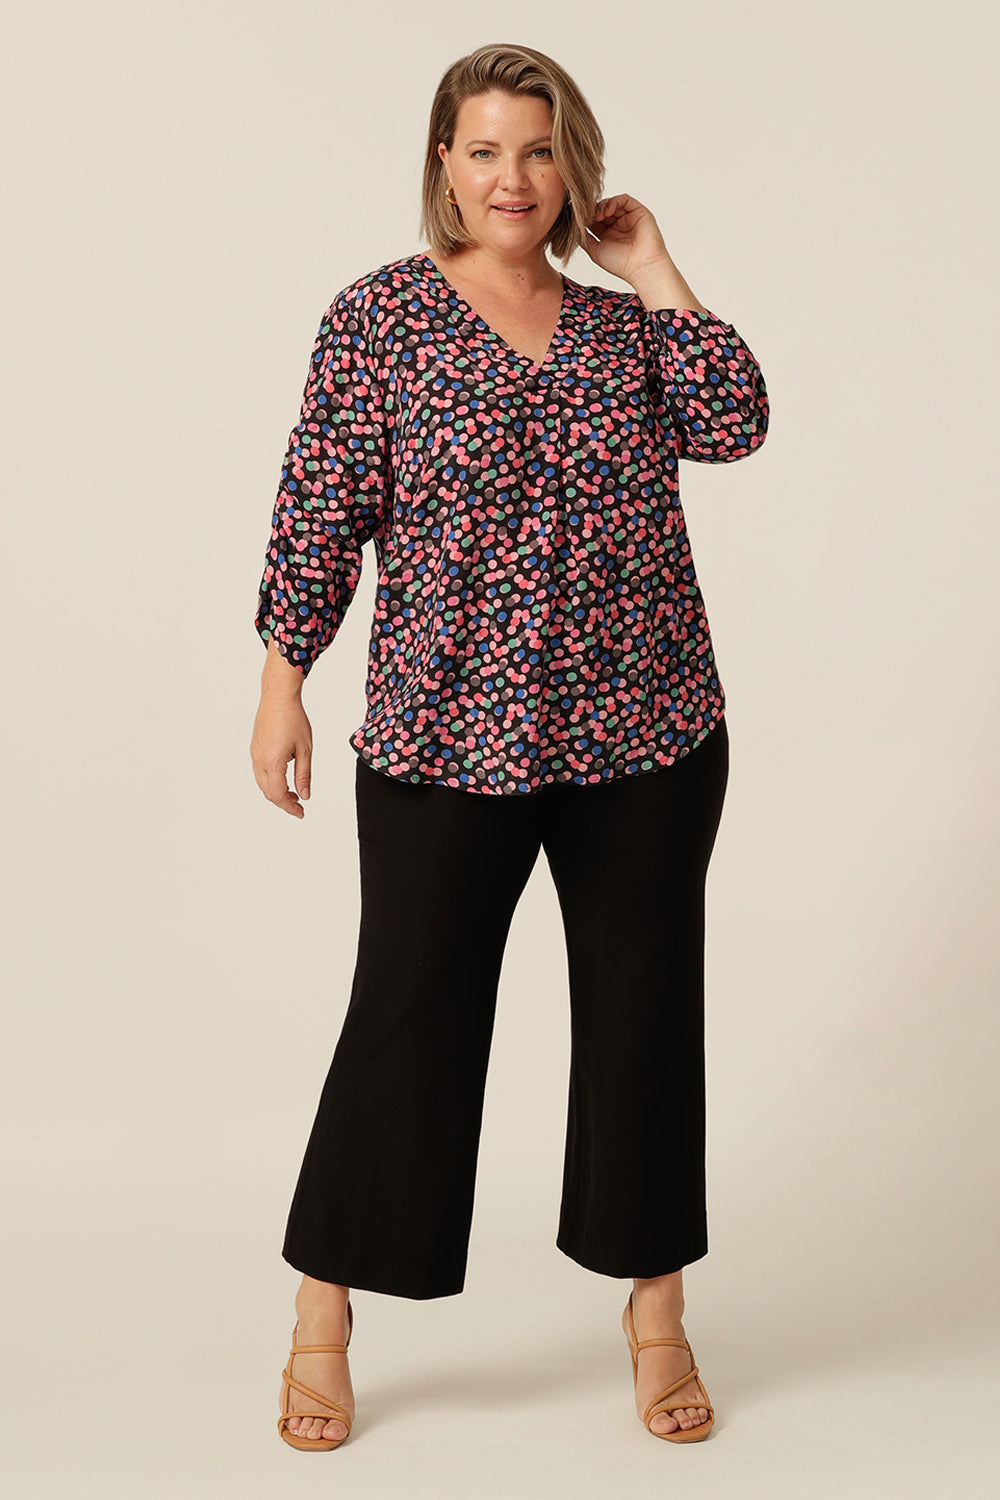 eco-conscious, lightweight V-neck top with ruched 3/4 length sleeves 